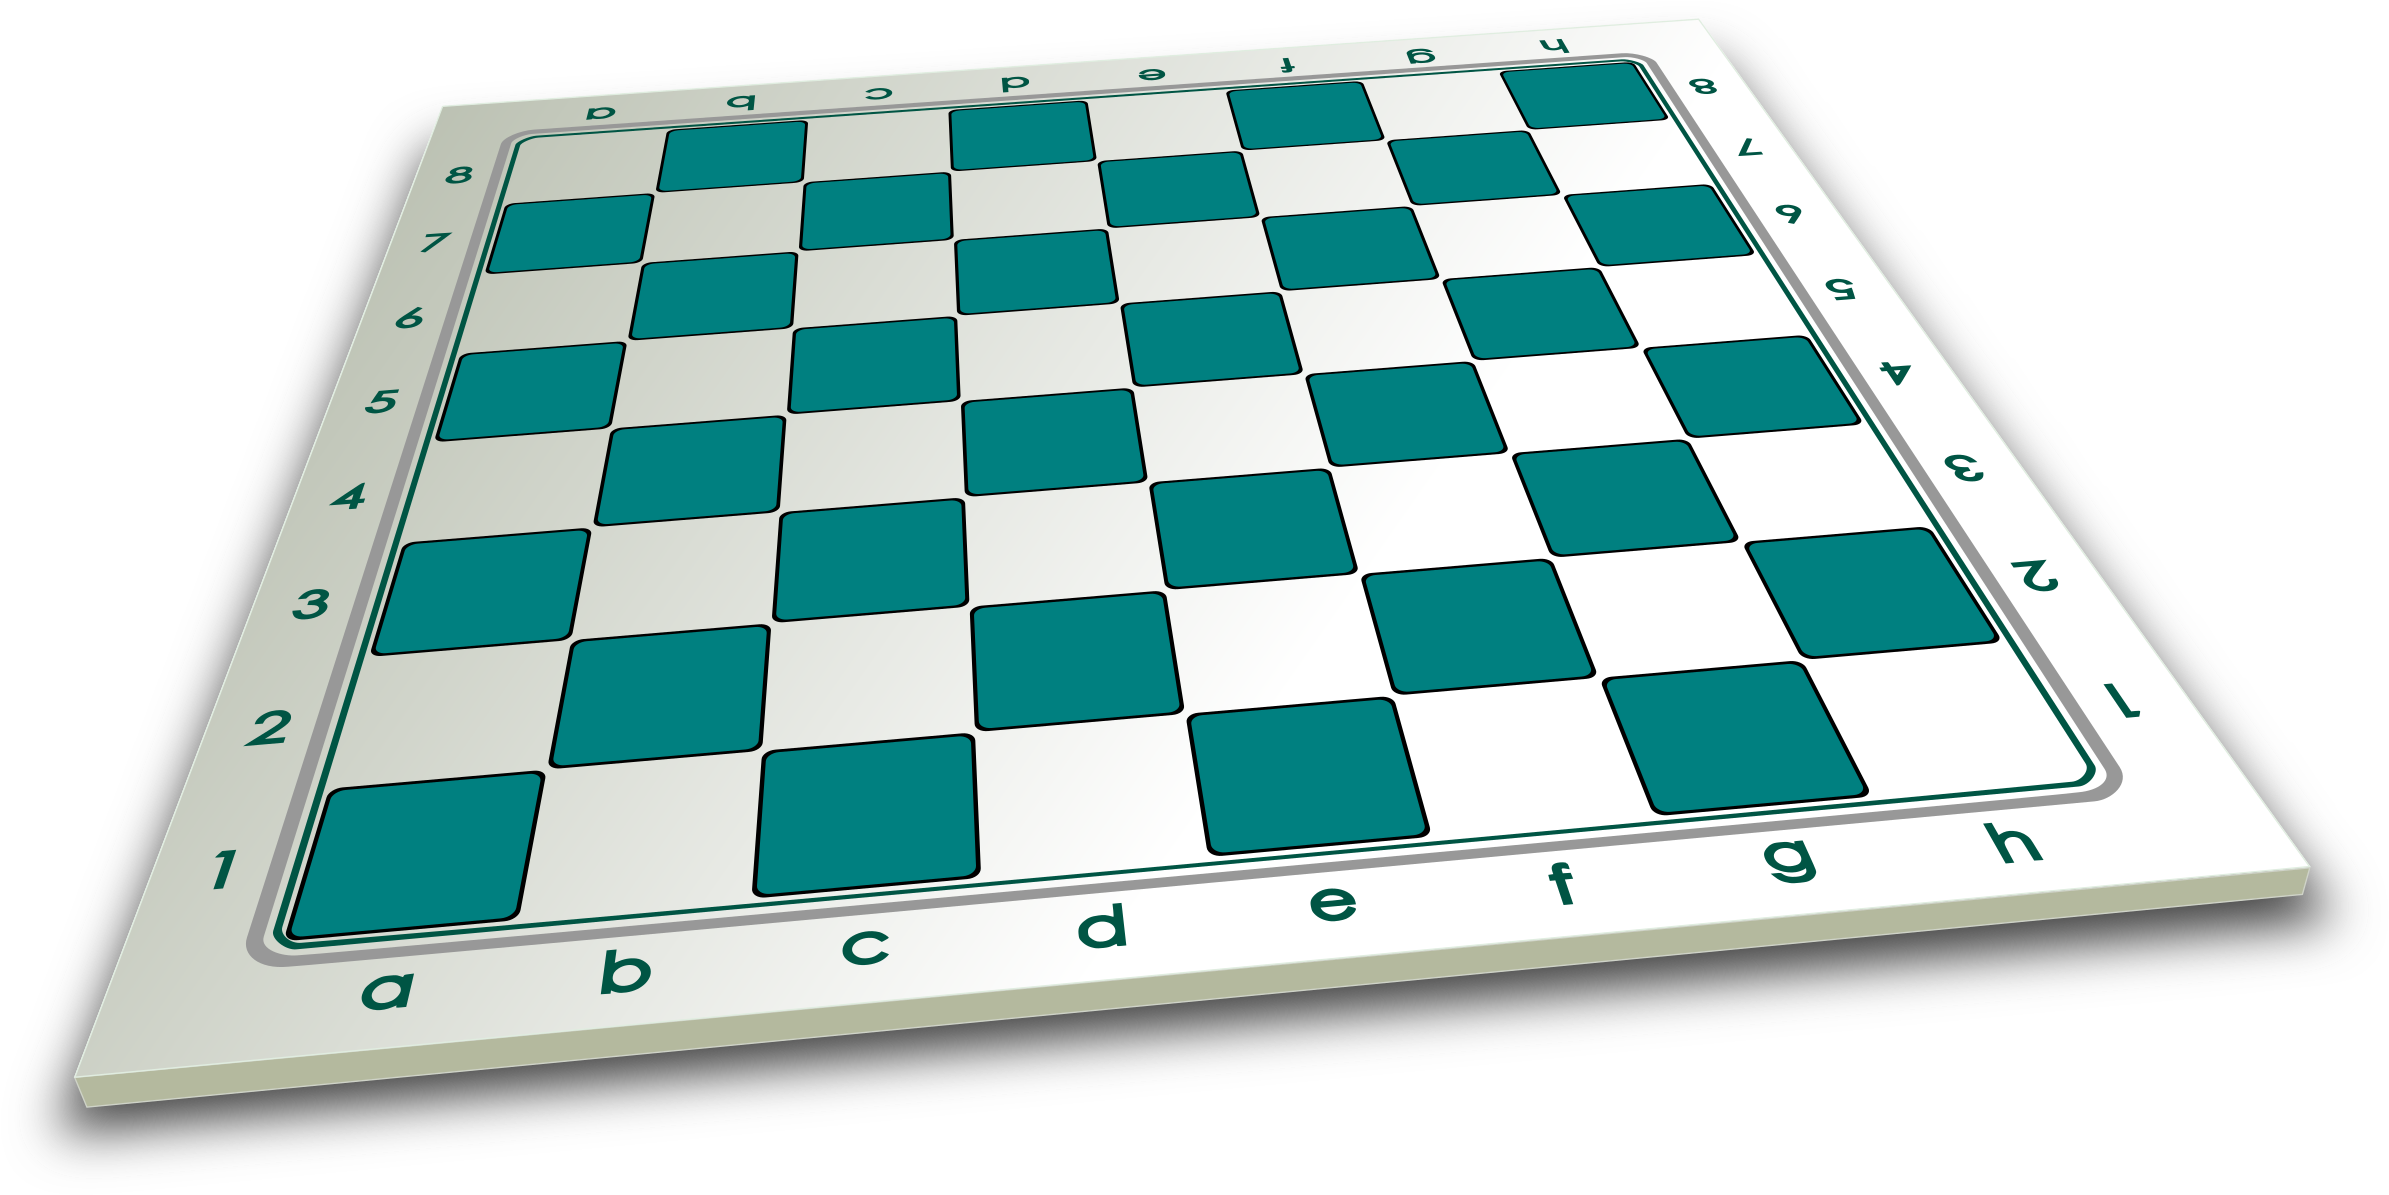 A Close-up Of A Chess Board